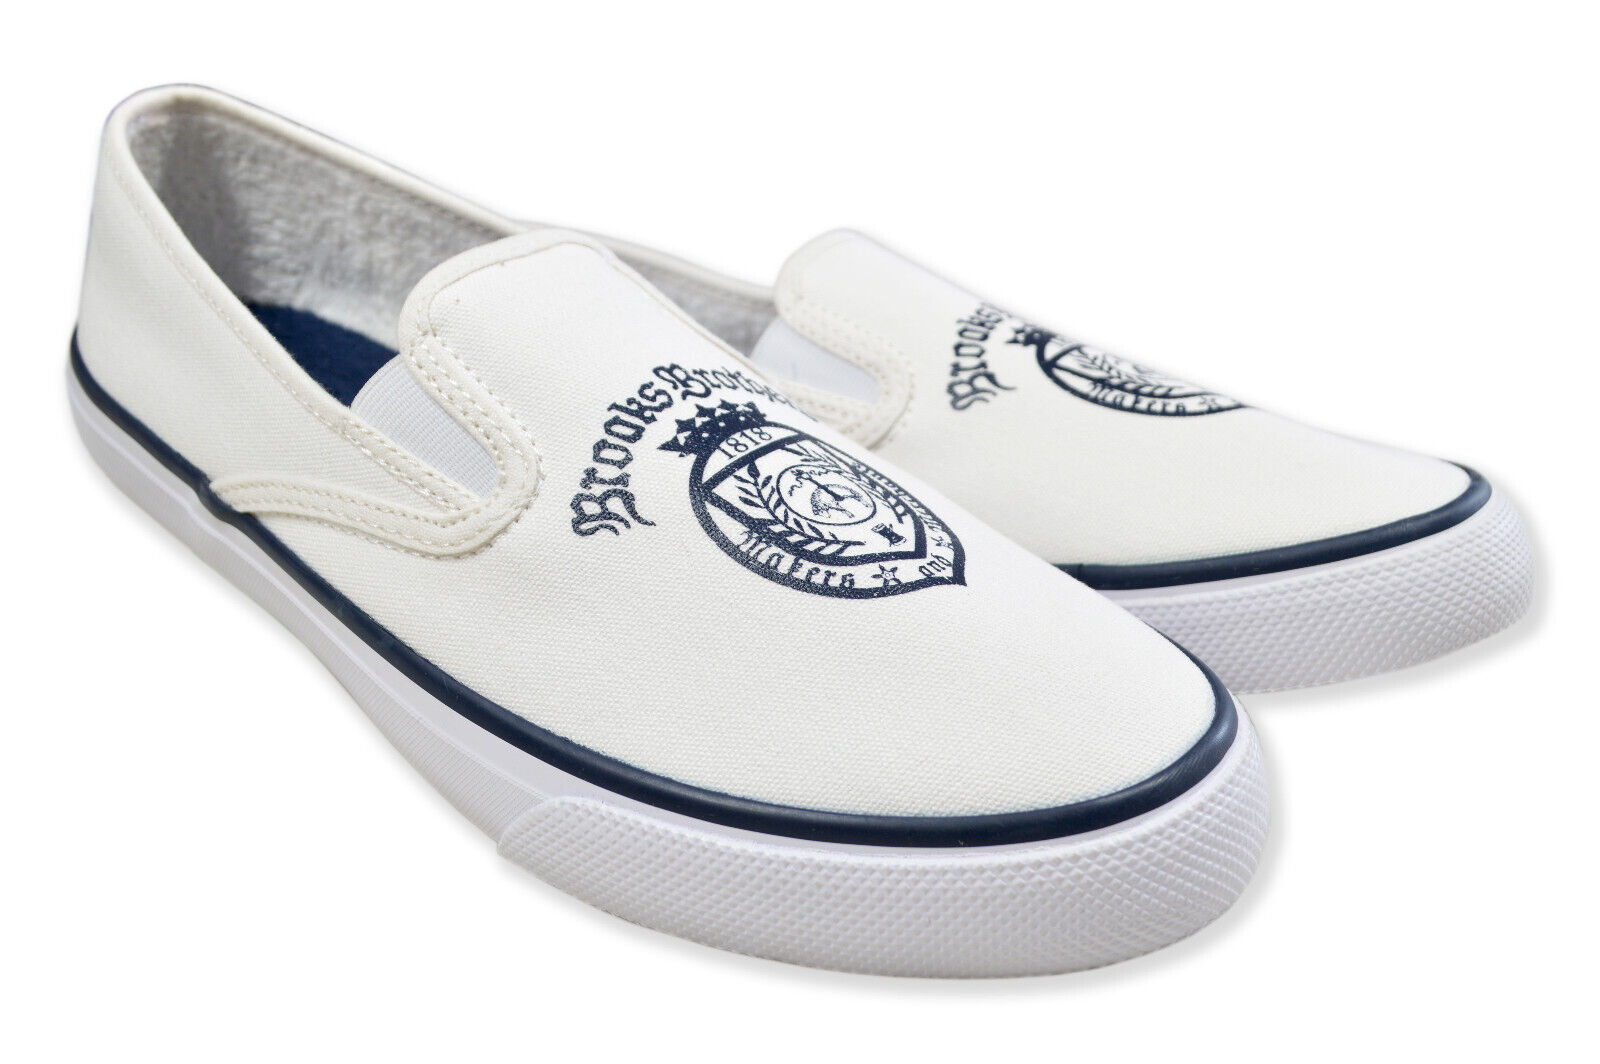 Brooks Brothers Sperry White & Navy Crest Canvas Slip On Sneakers, 9 M 8412-9 - $99.00